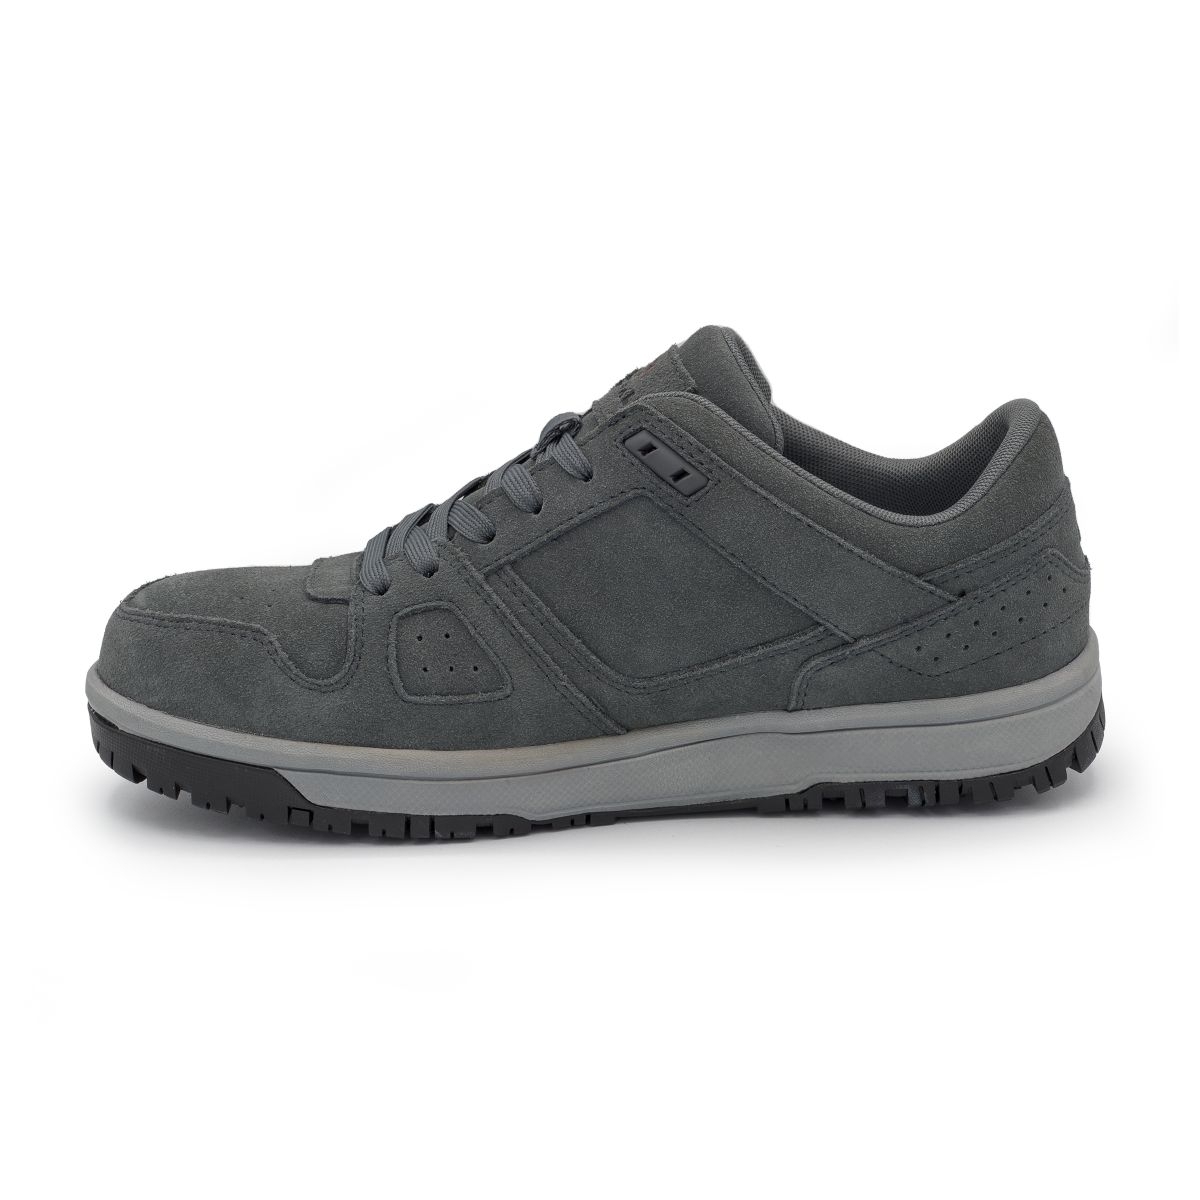 AIRWALK SAFETY Men's Mongo Composite Toe EH Work Shoe Charcoal/Grey - AW6301 CHARCOAL/GRAY - CHARCOAL/GRAY, 11.5-M